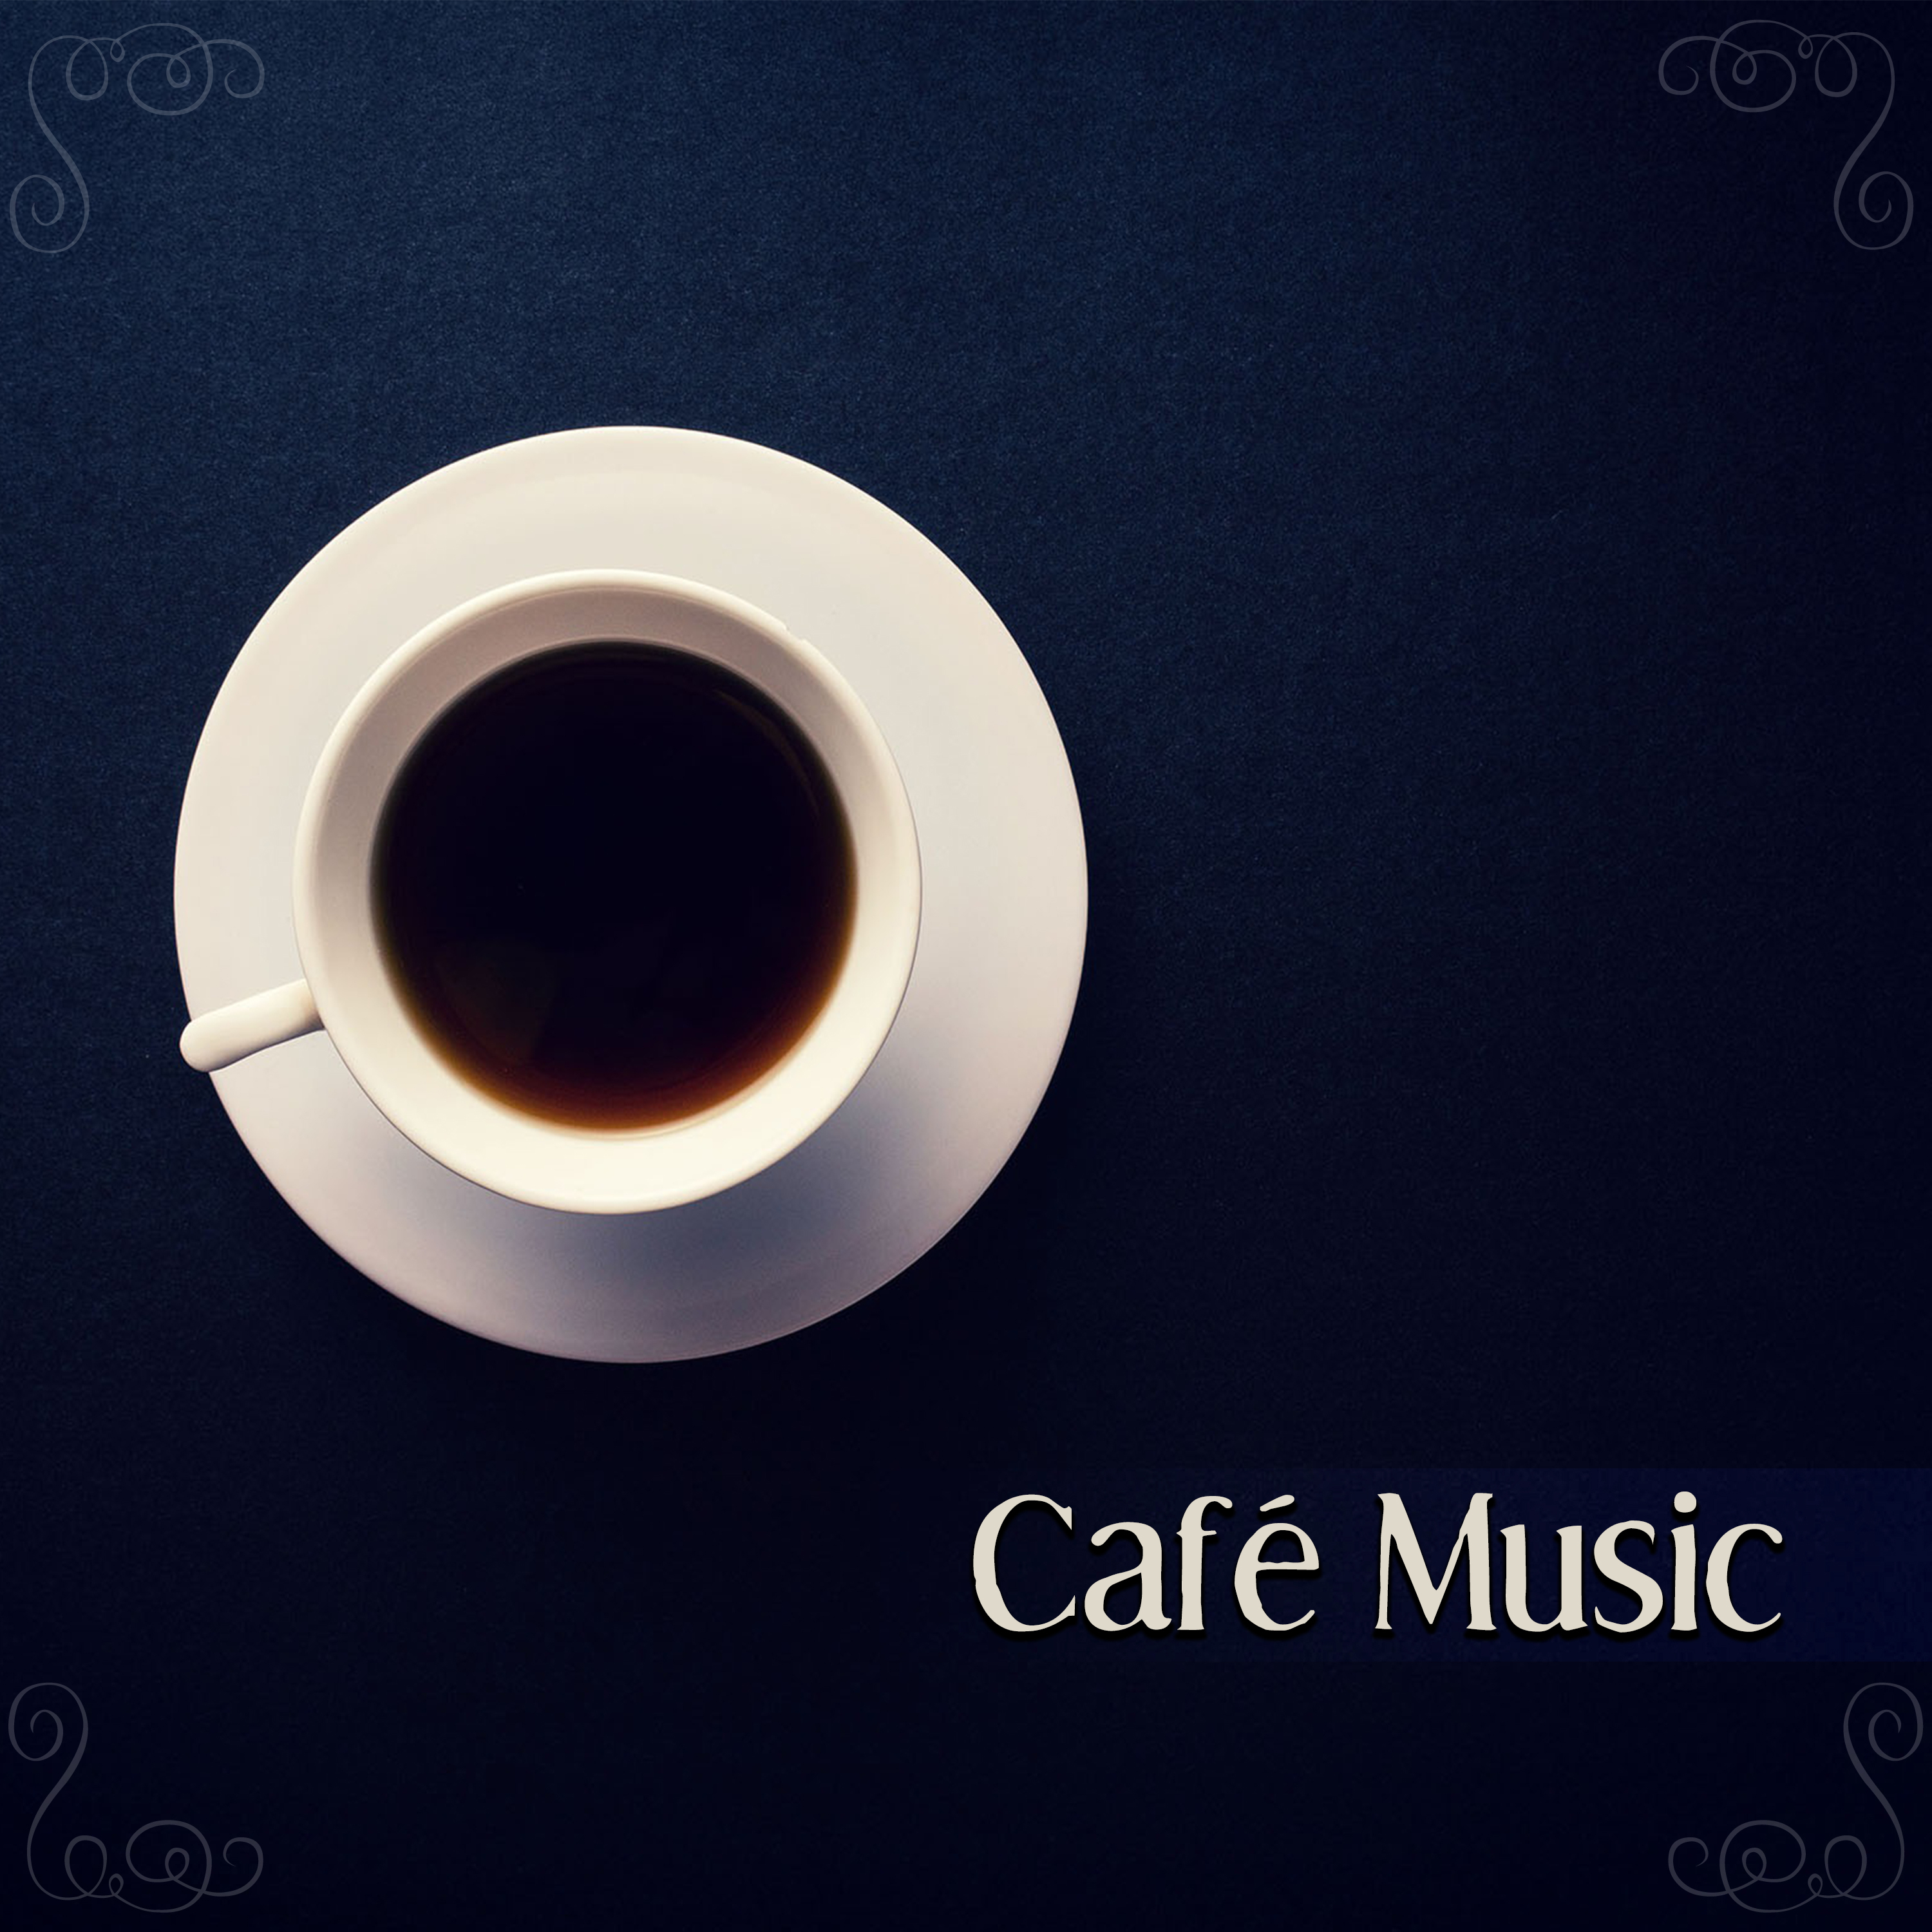 Cafe Music  Mellow Jazz Instrumental, Peaceful Guitar in the Backround, Solo Piano Jazz Music, Best Background for Shopping Center, Waiting Room  Cafe